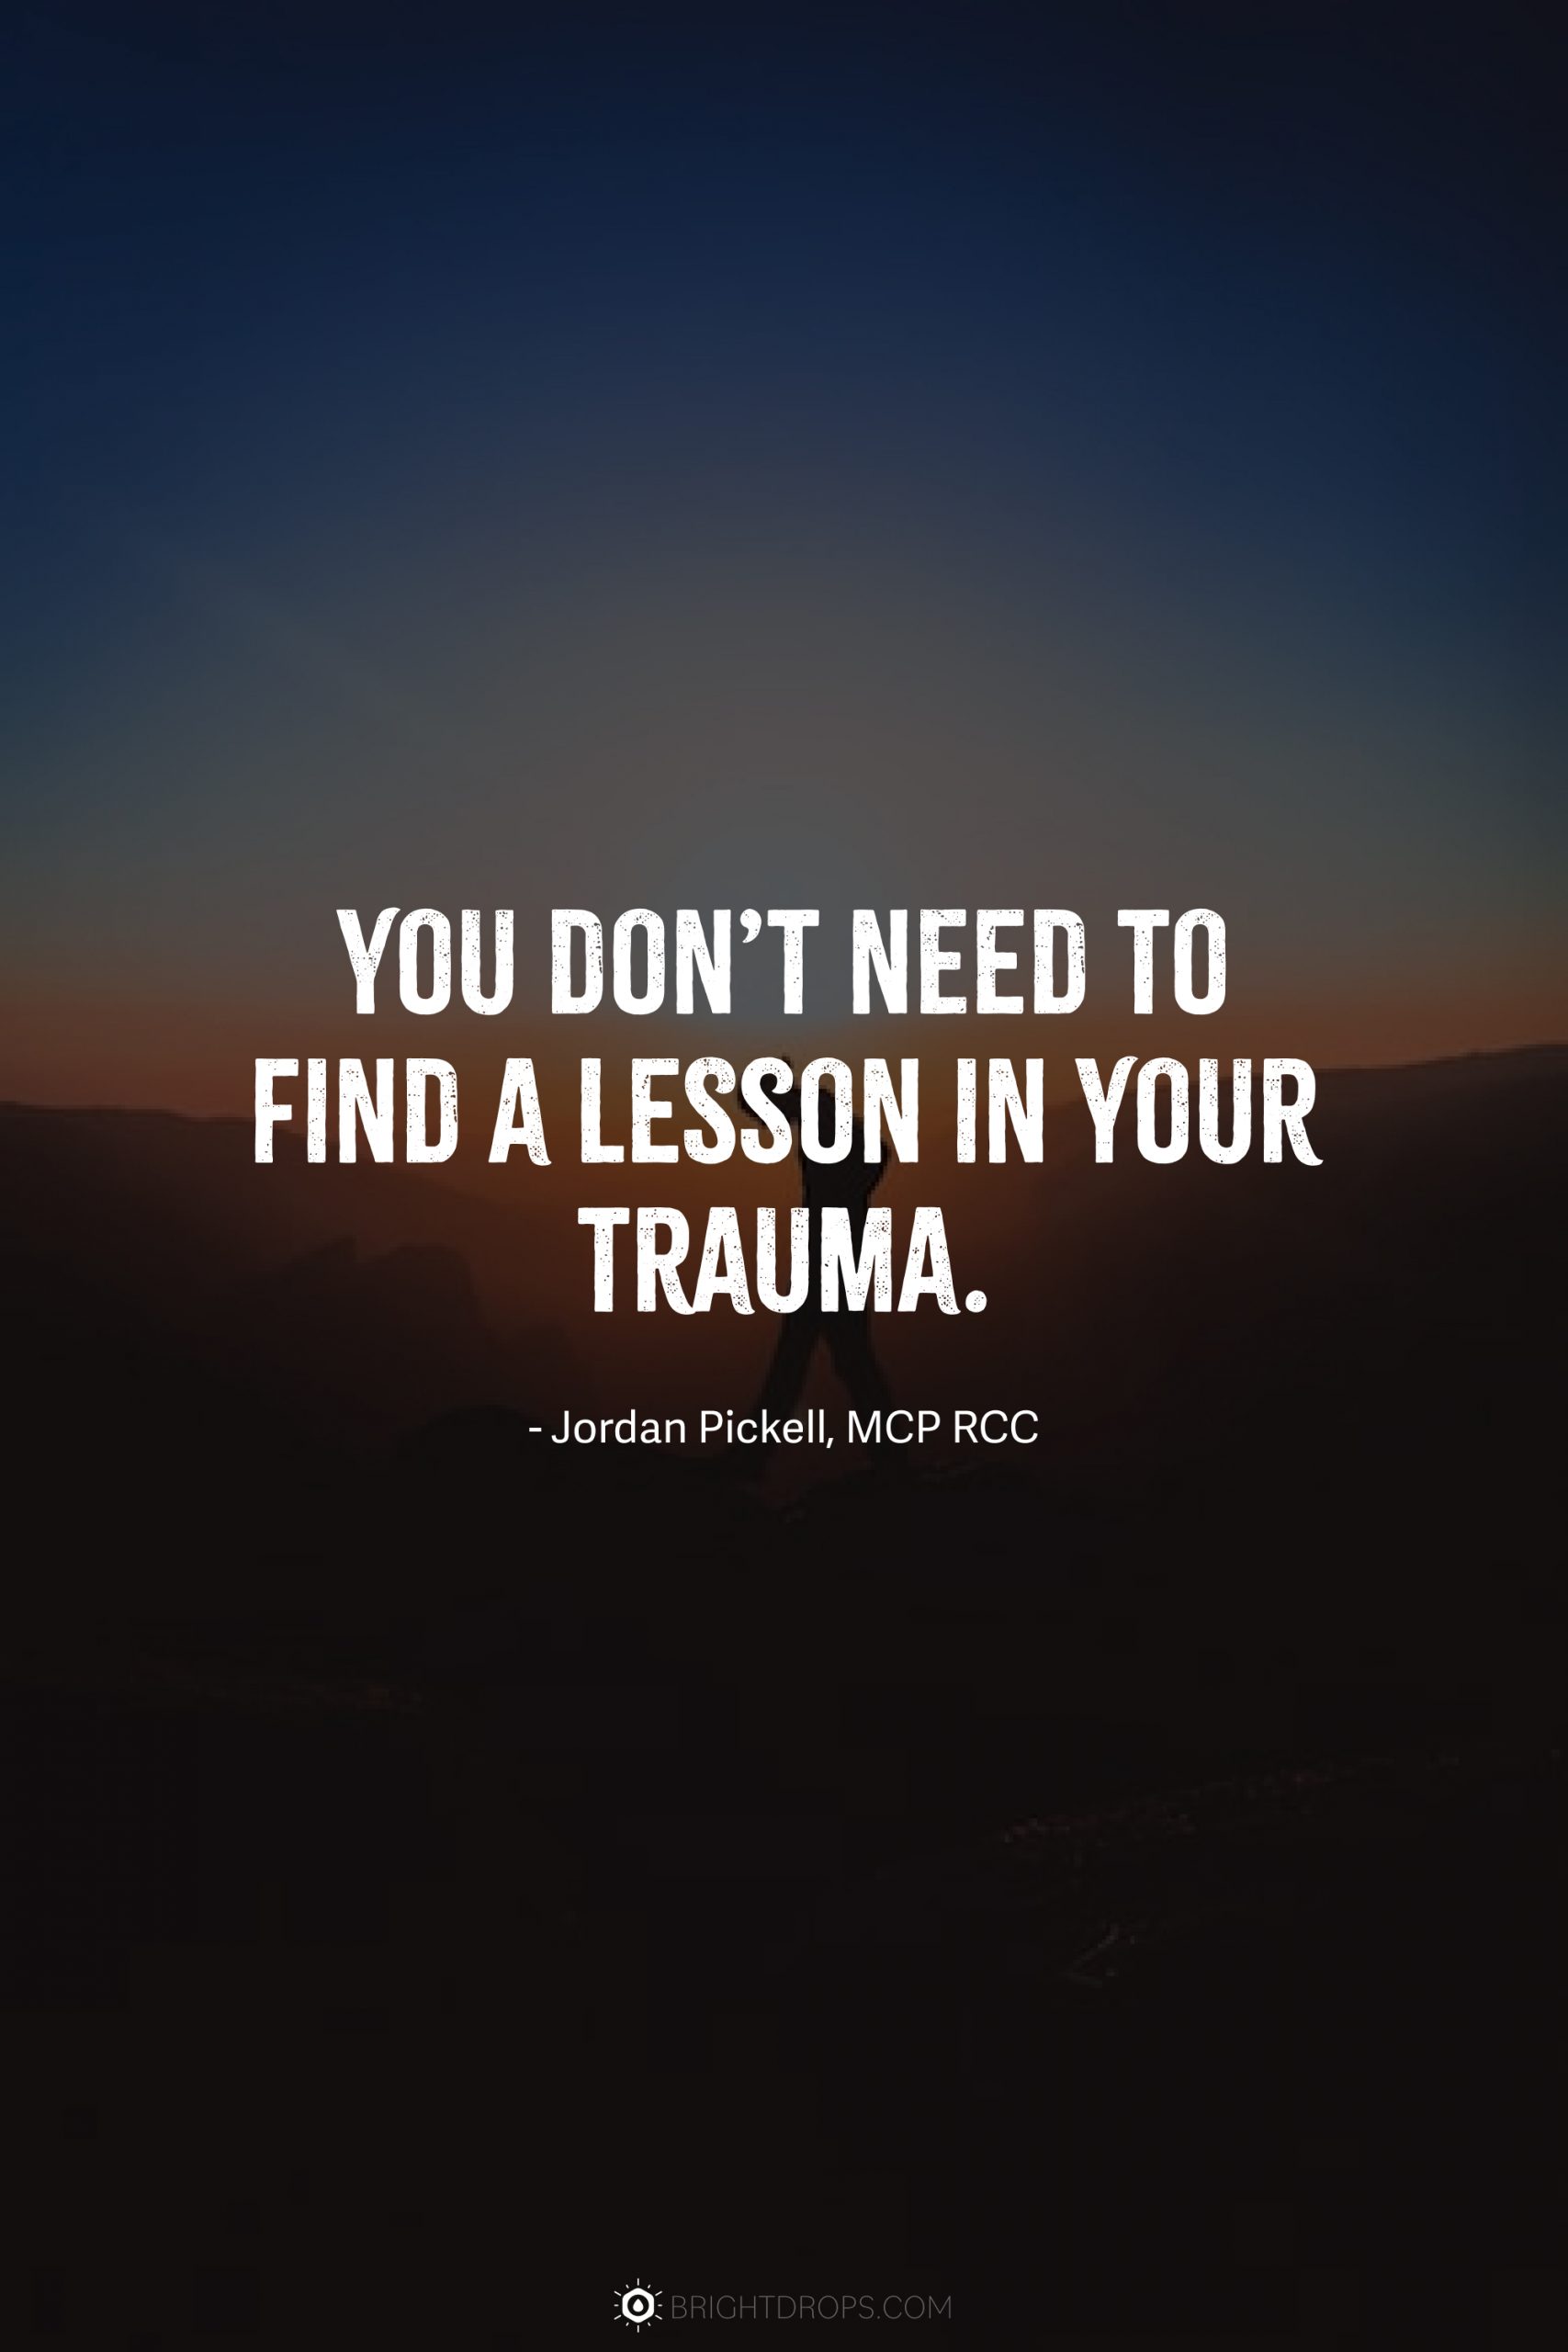 You don’t need to find a lesson in your trauma.